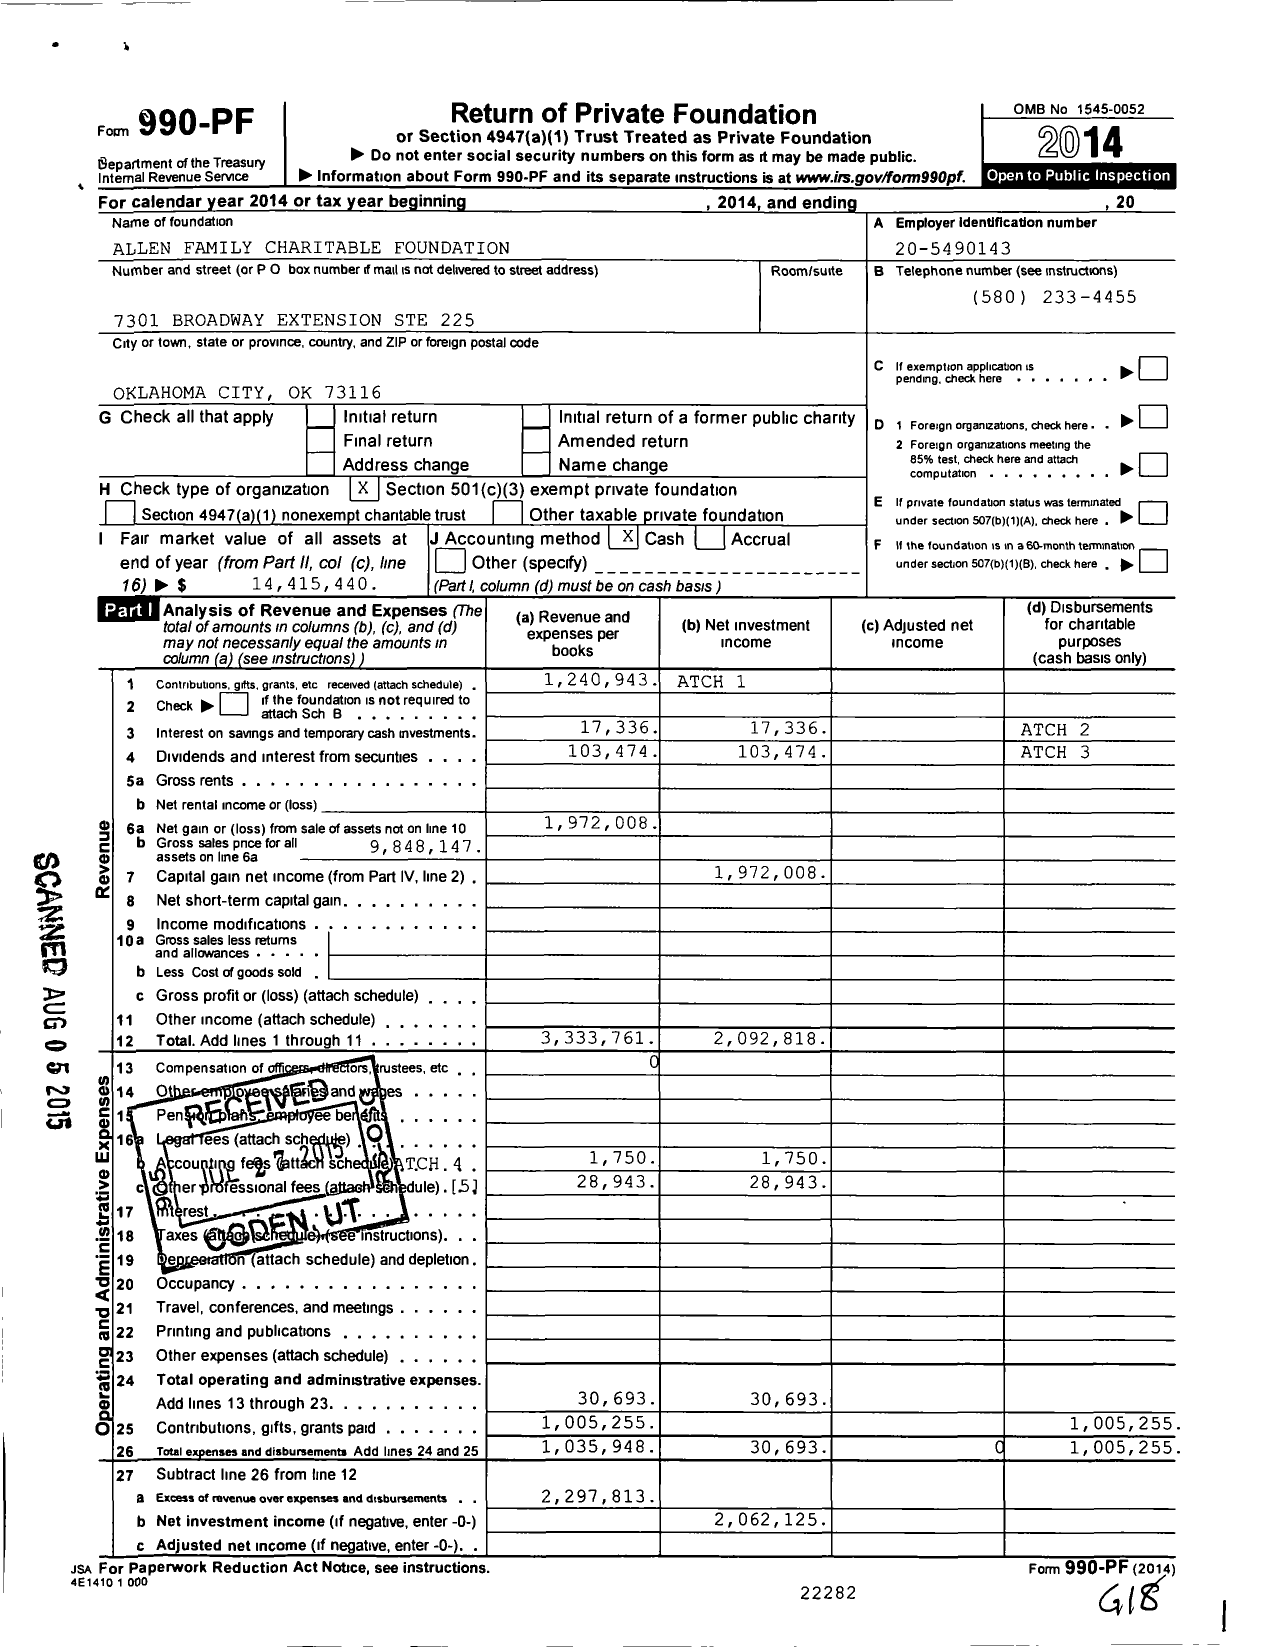 Image of first page of 2014 Form 990PF for Allen Family Charitable Foundation